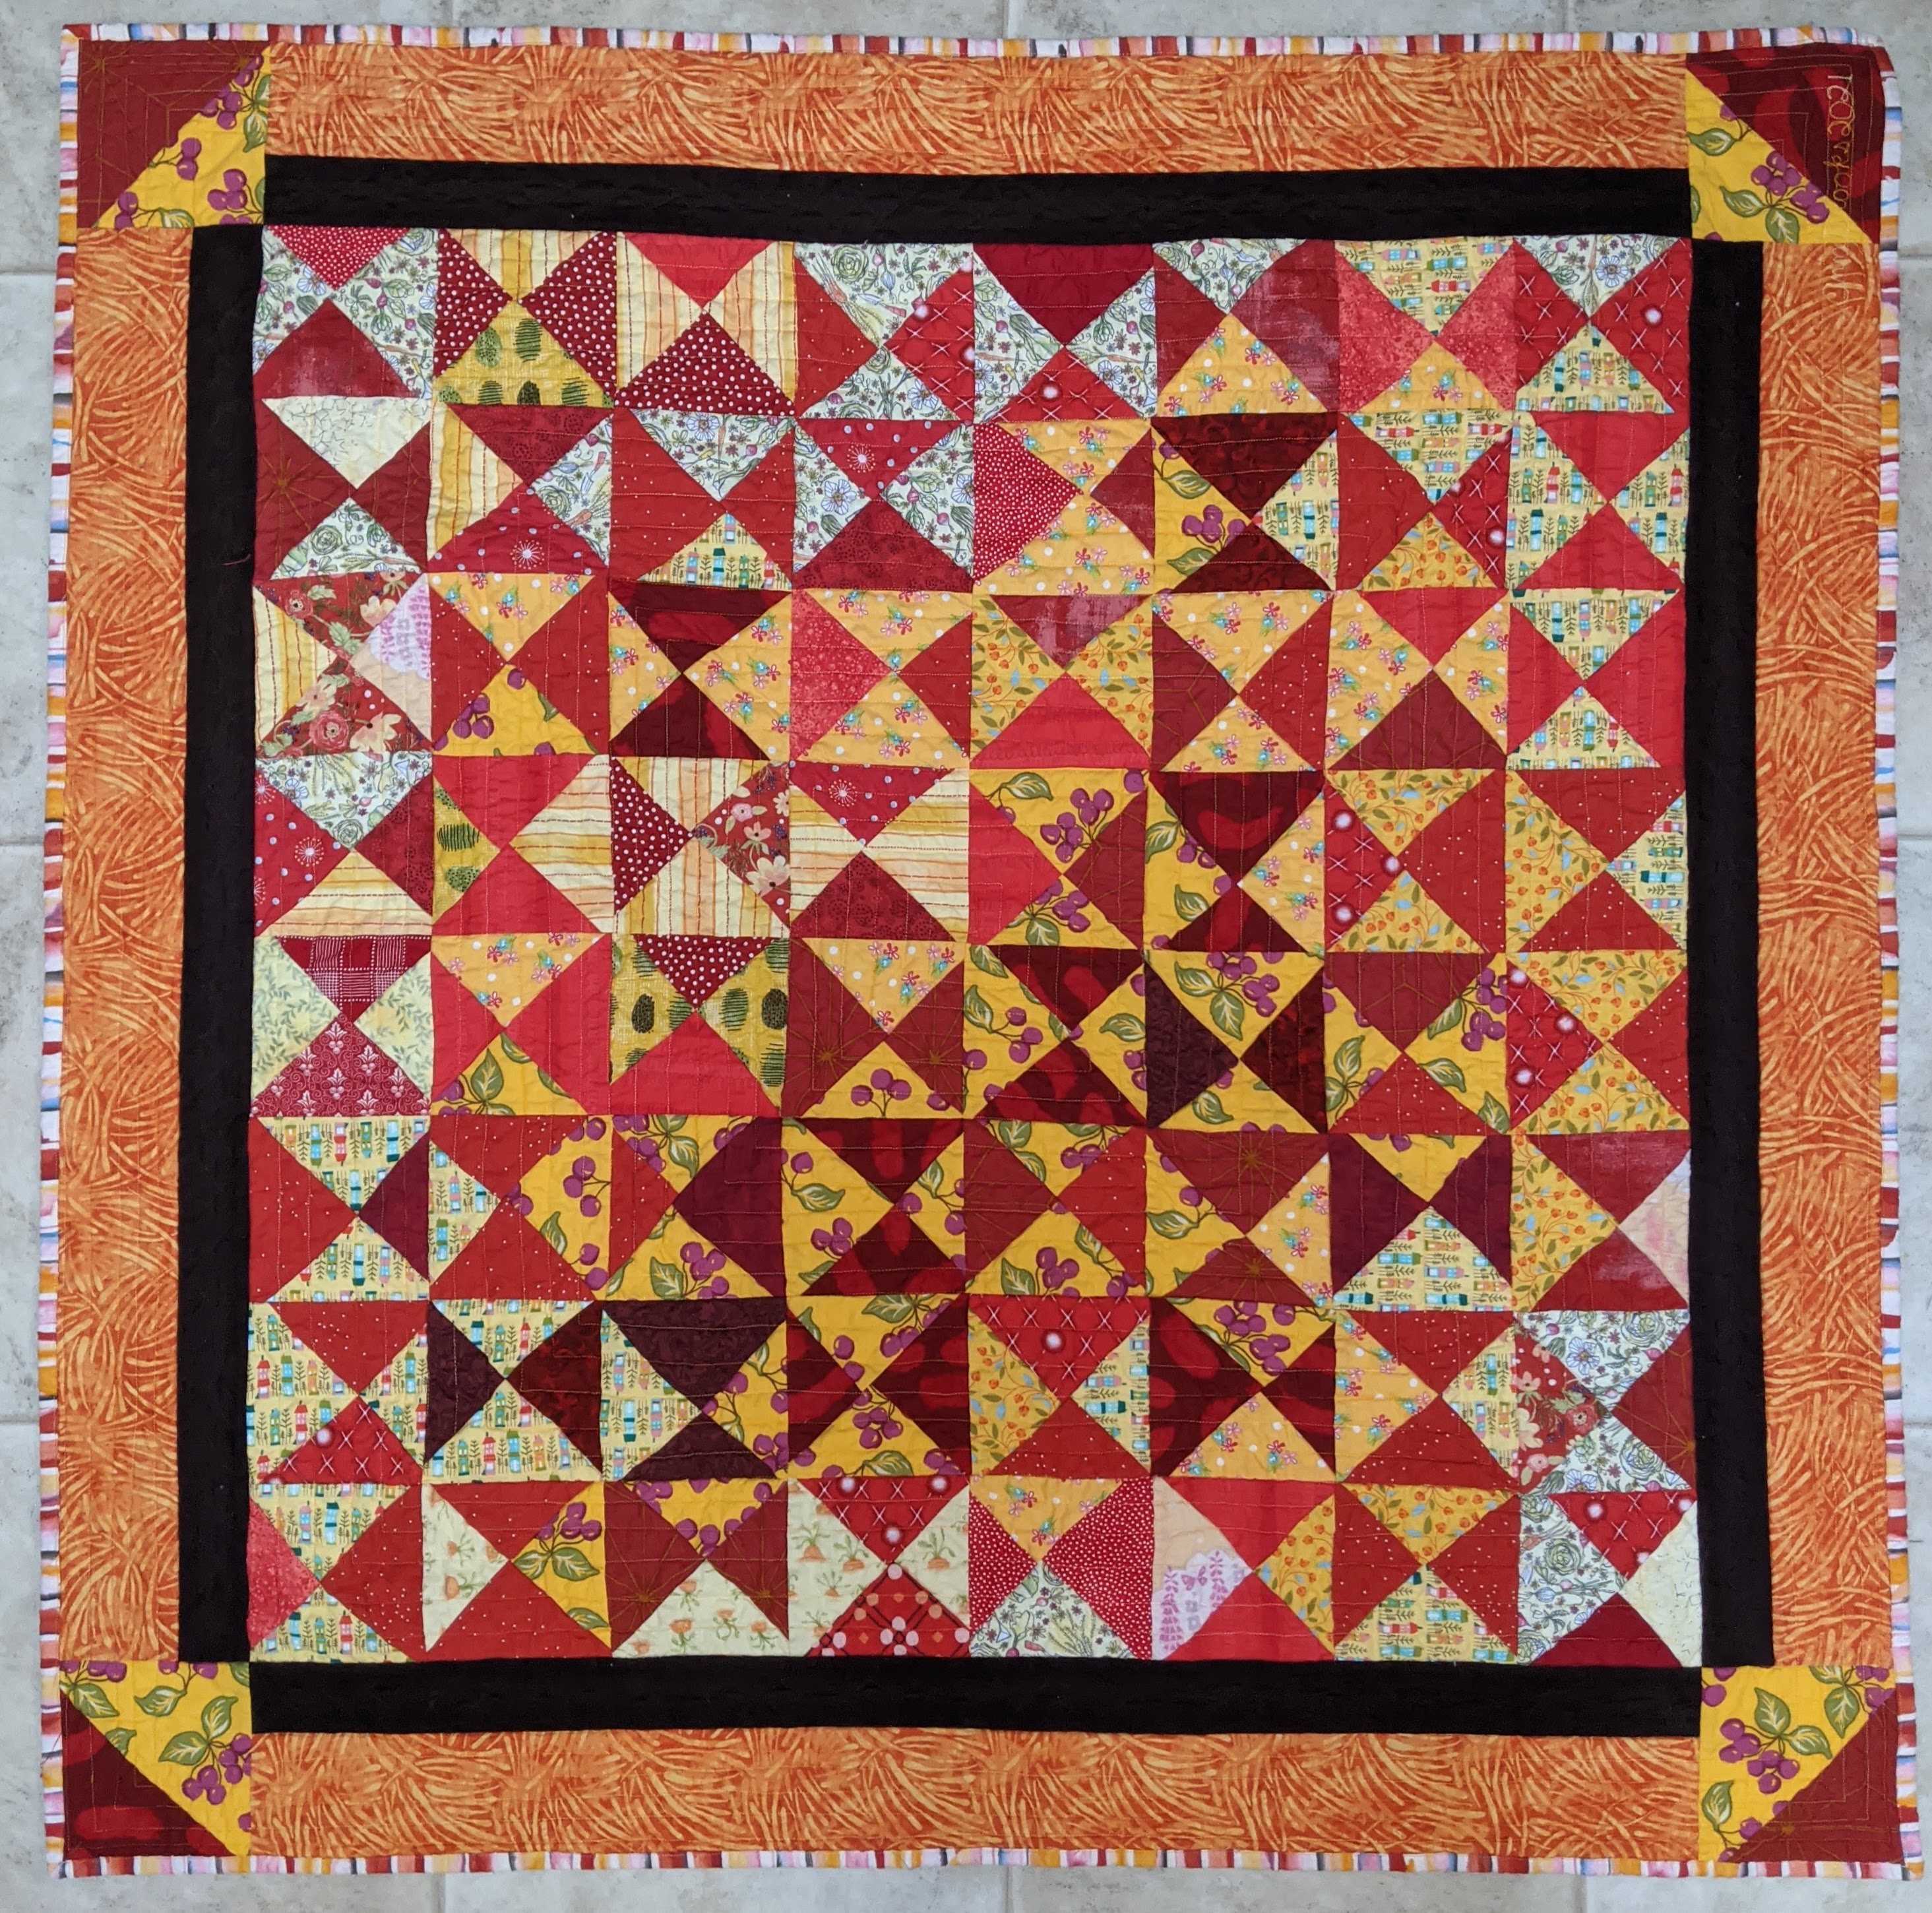 Hourglass Twist Quilt Pattern by Missouri Star Size Full Traditional | Missouri Star Quilt Co.